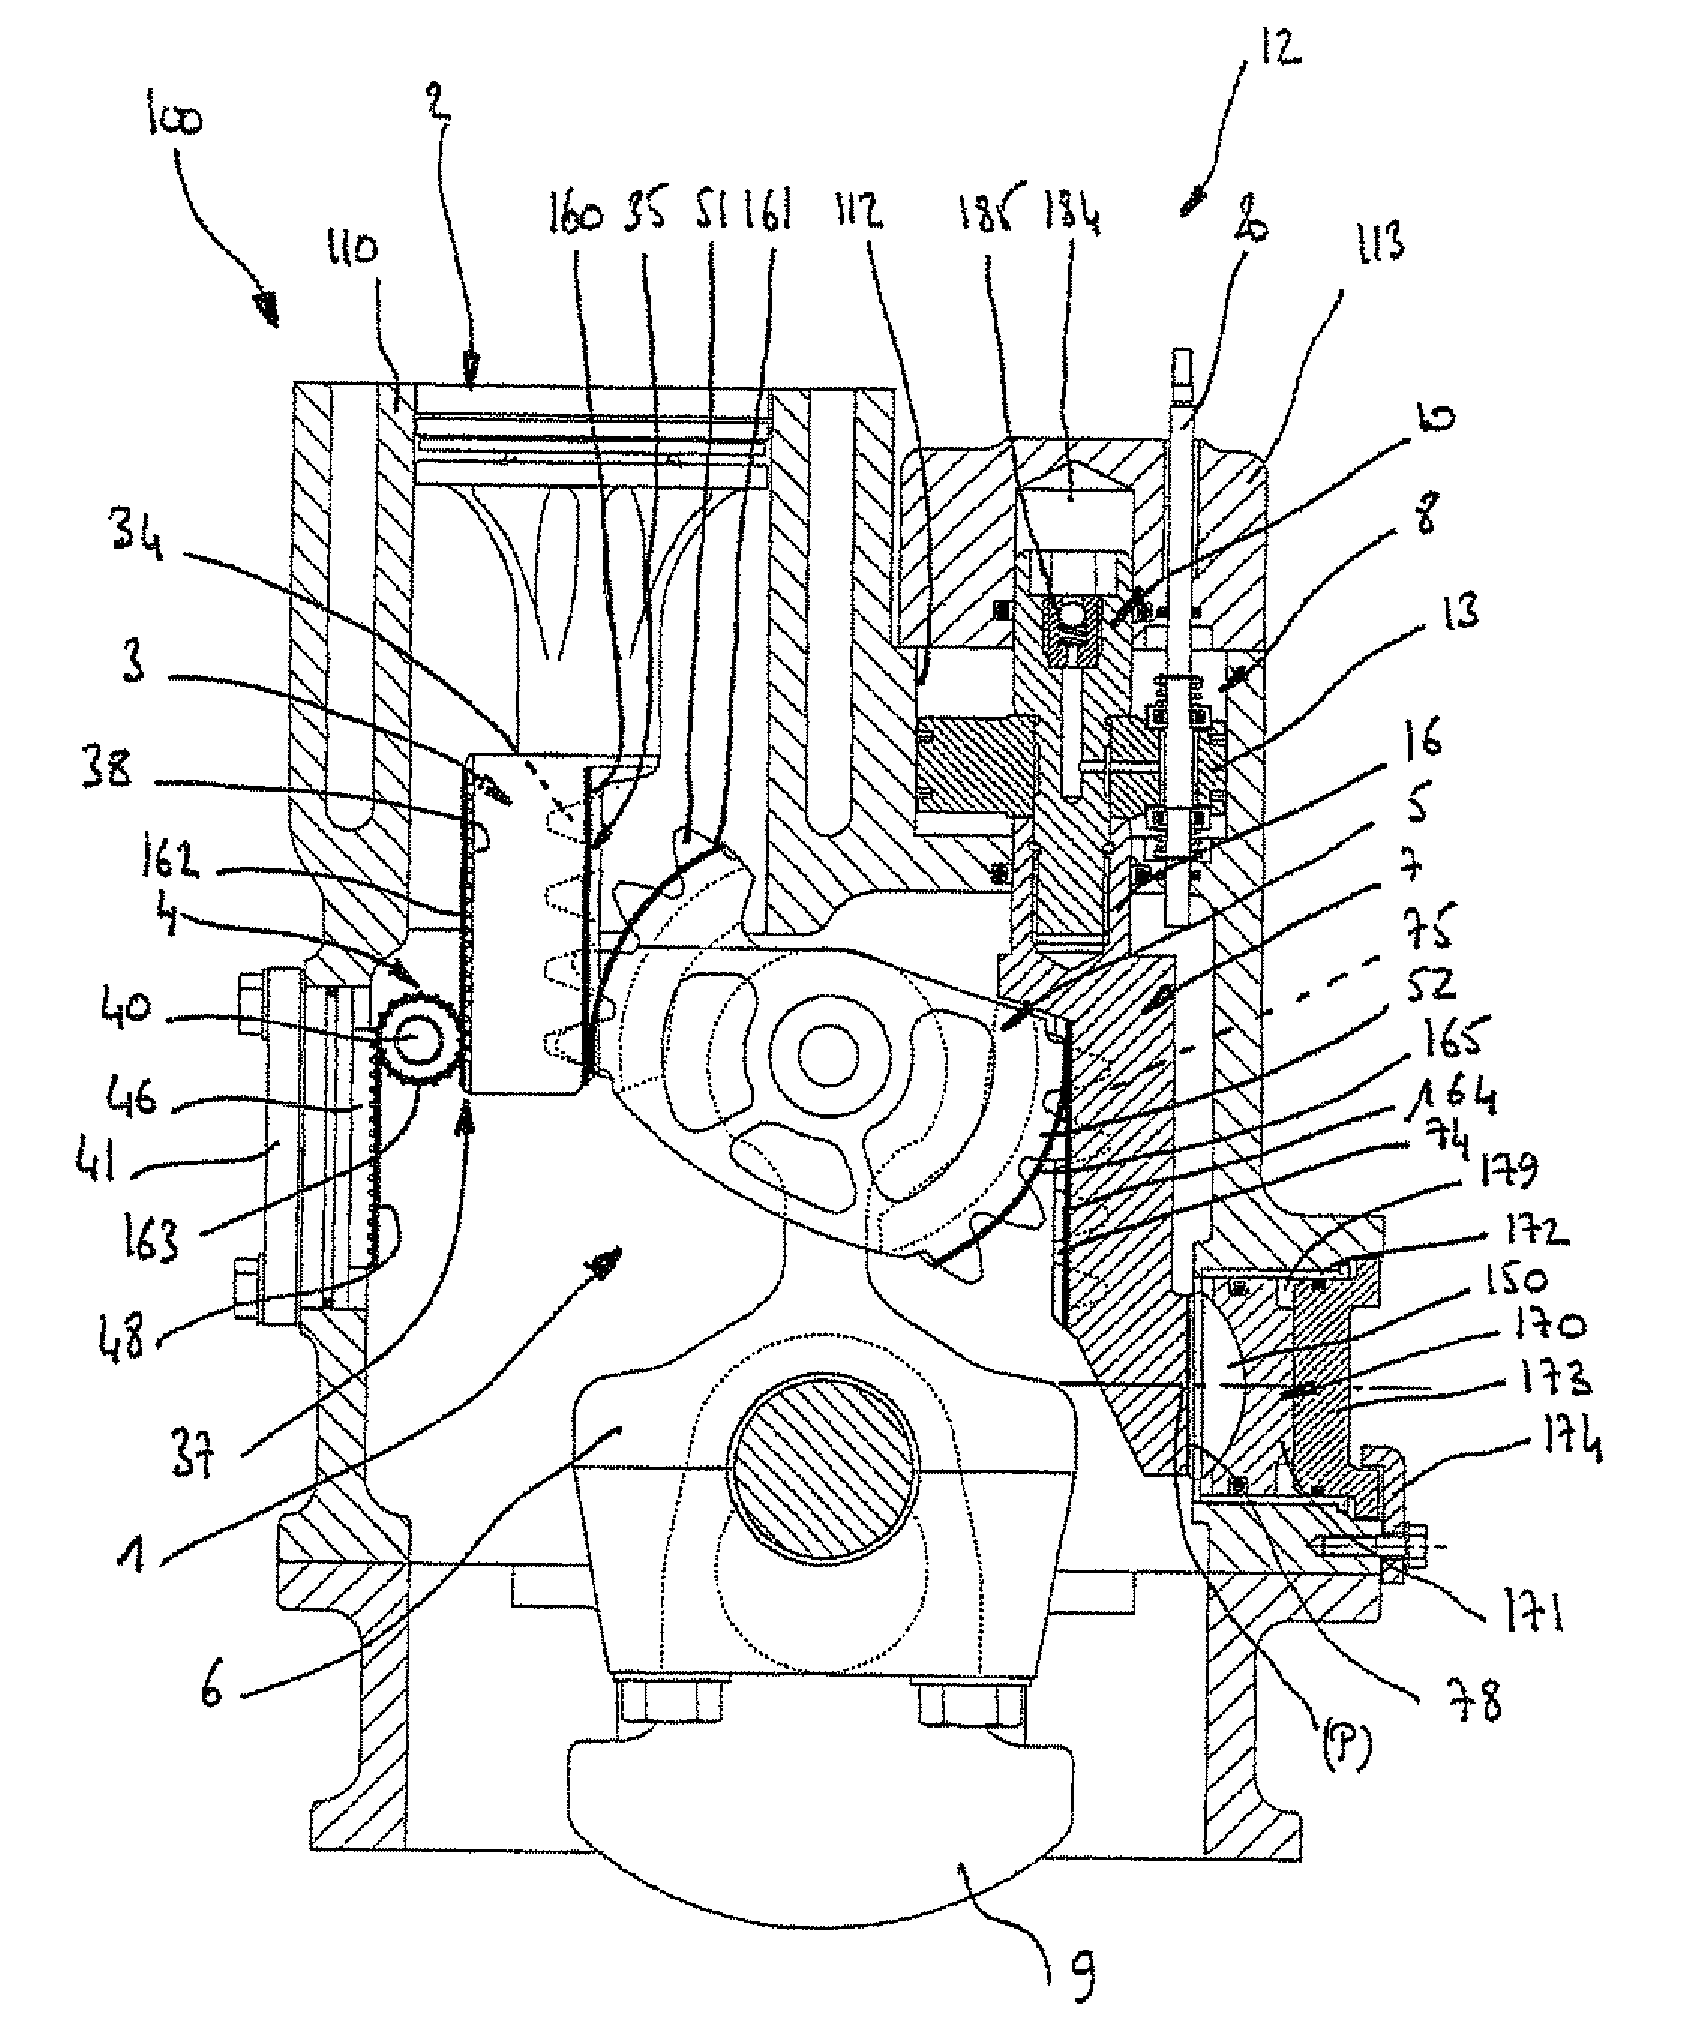 Pressure device for a variable compression ratio engine